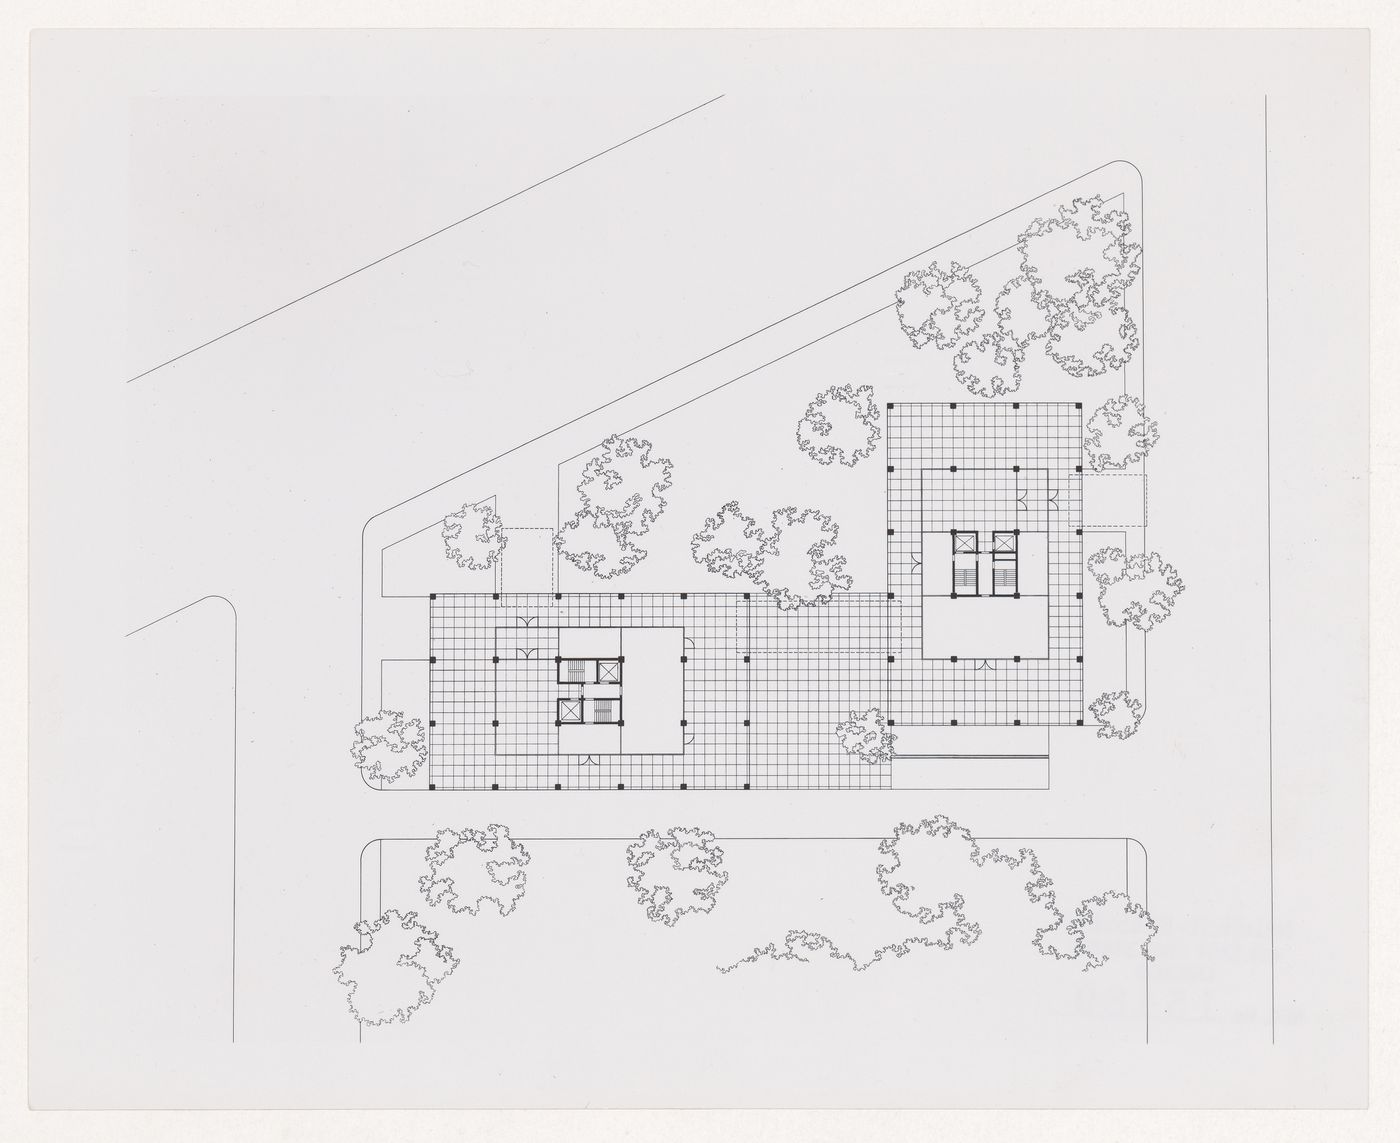 Photograph of a site plan for 860 and 880 Lake Shore Drive Apartments, Chicago, Illinois